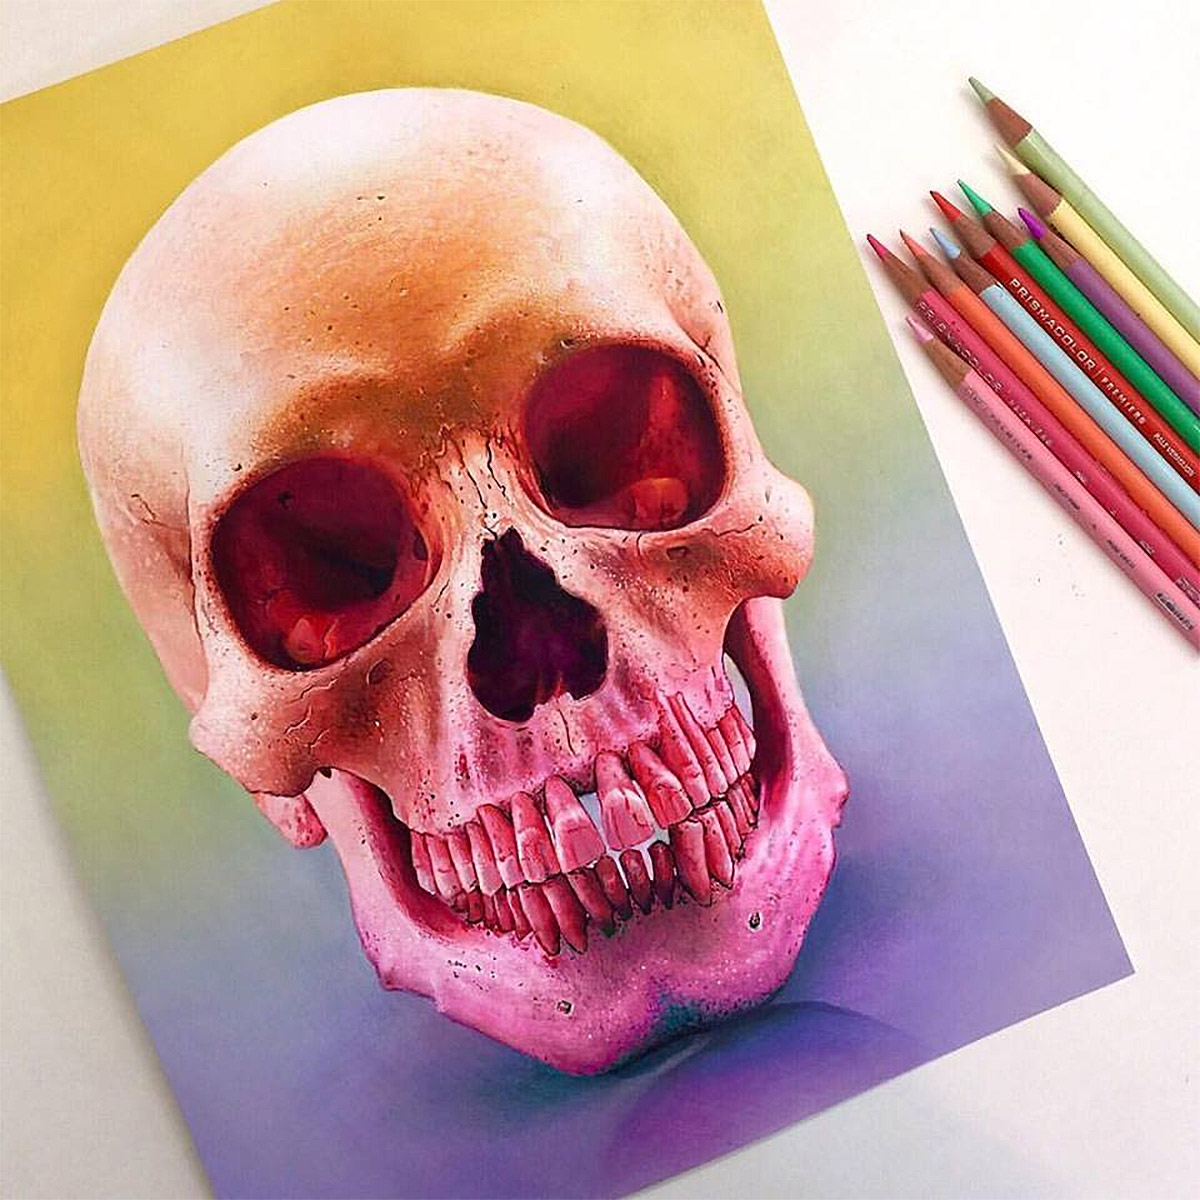 Vibrant Pencil Drawings Bursting With Color by Morgan Davidson -  icanbecreative